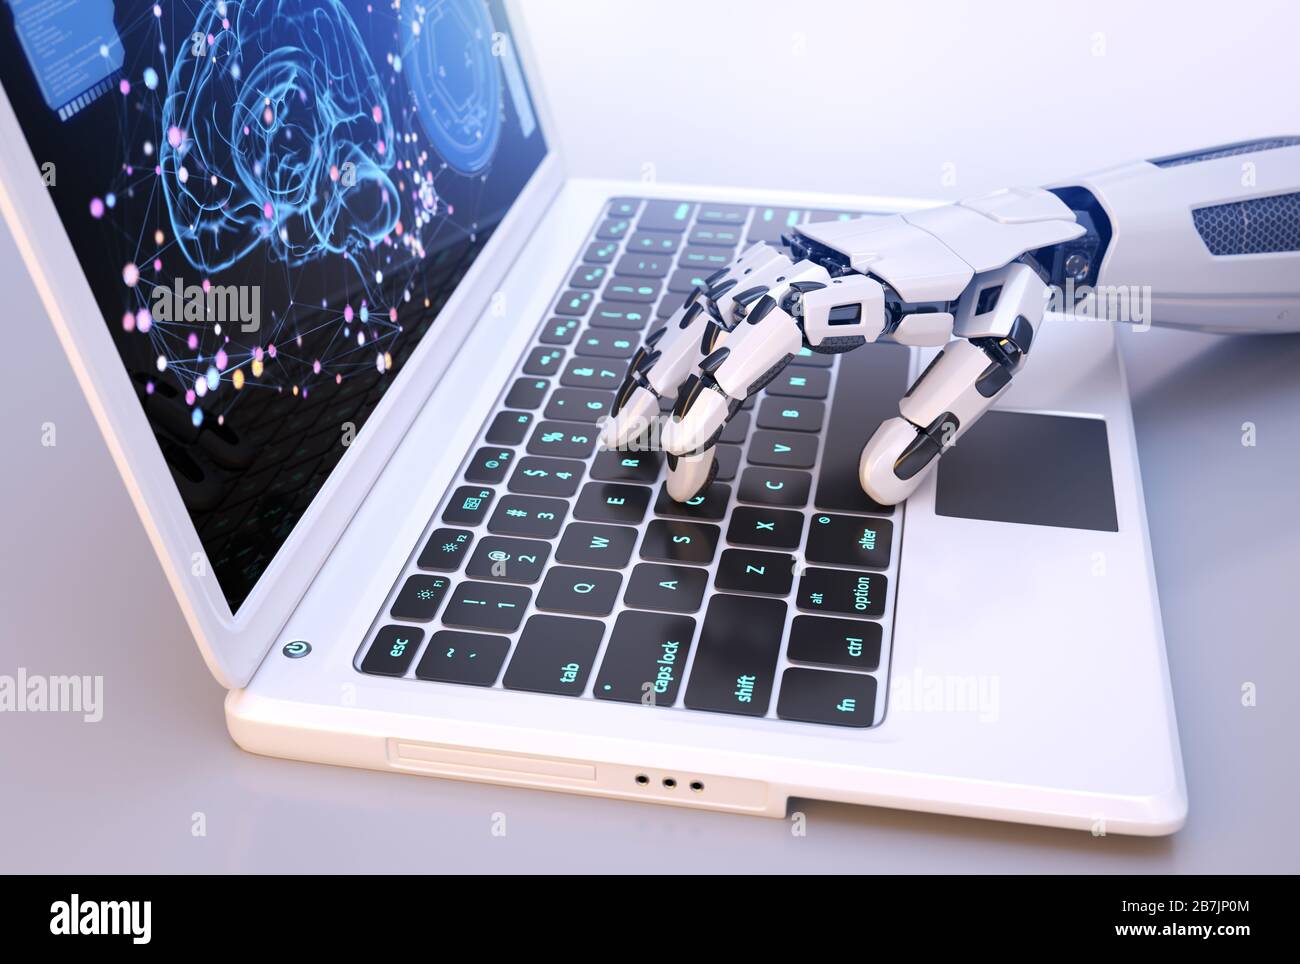 Robot's hand typing on keyboard. 3D illustration Stock Photo